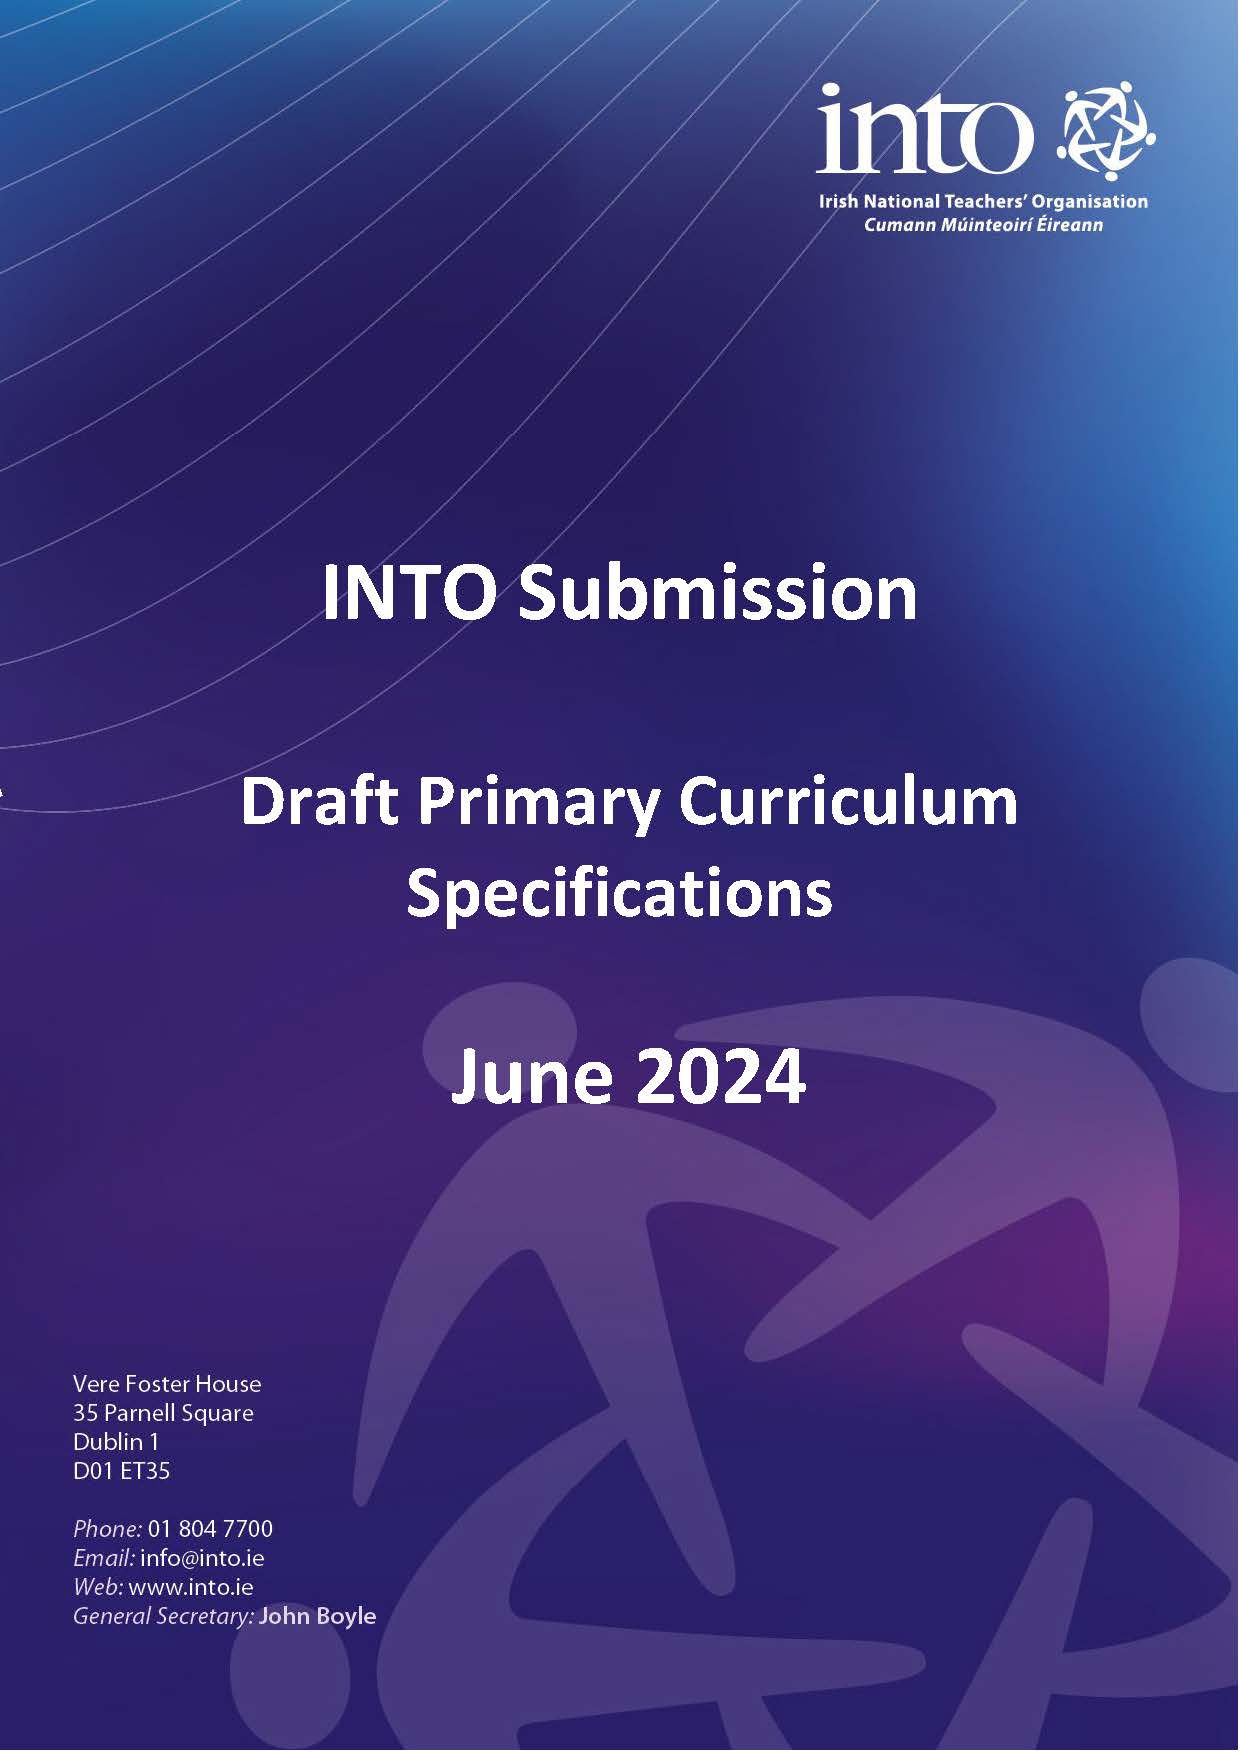 INTO Submission on Draft Primary Curriculum Specifications